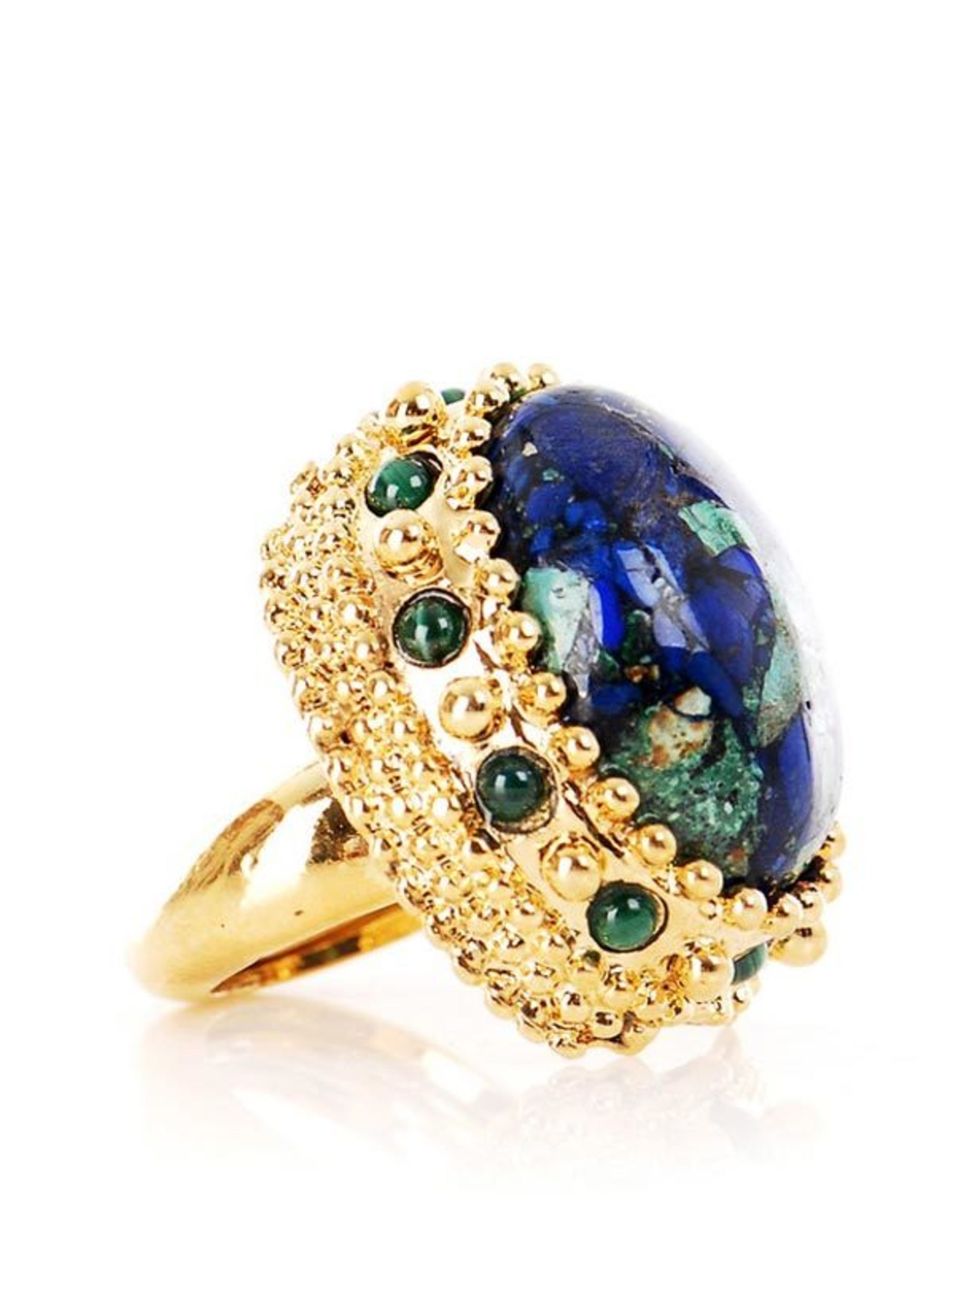 <p>Gemstone cocktail ring, £88, by Kara by Kara Ross at <a href="http://www.matchesfashion.com/fcp/product/Matches-Fashion/Jewellery/kara-by-kara-ross-KAR-X-KBCR20-SO3-jewellery-GREEN/27772">Matches</a> </p>